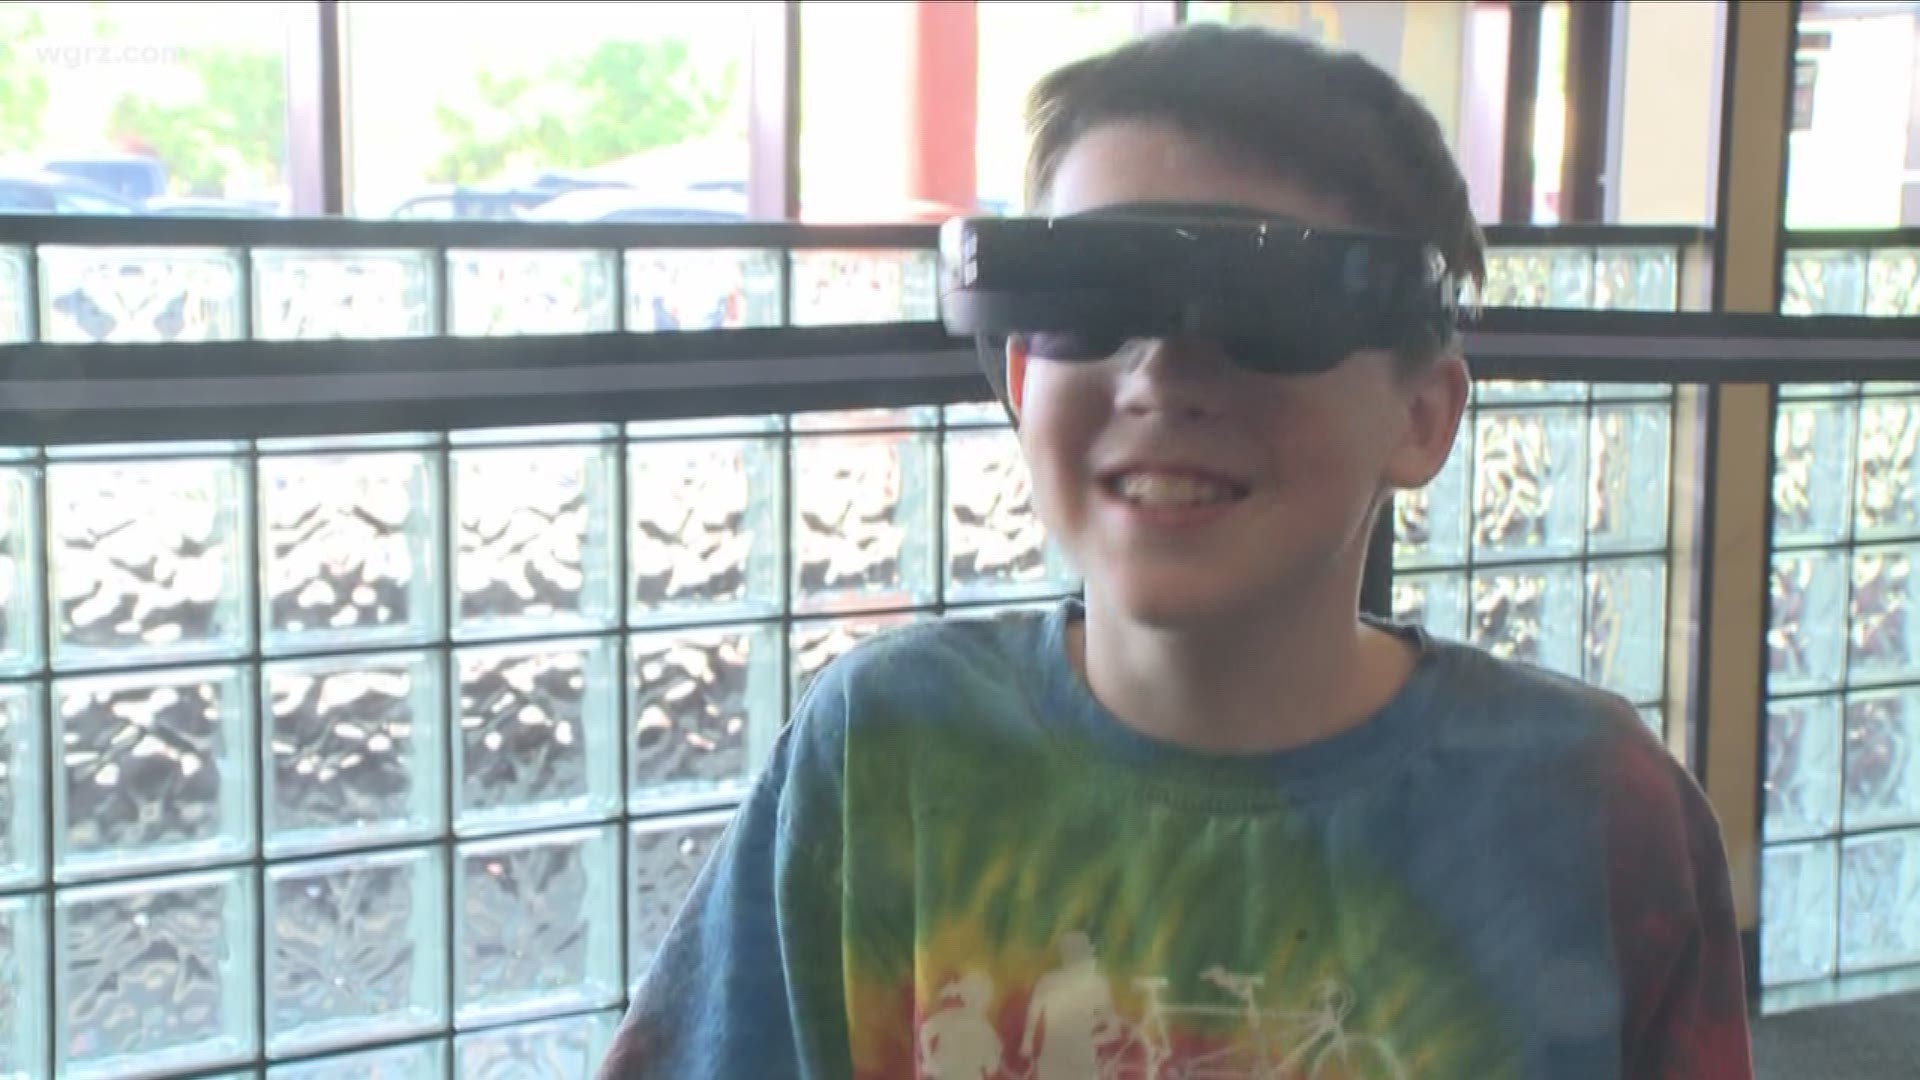 Local boy sees more than "Star Wars"